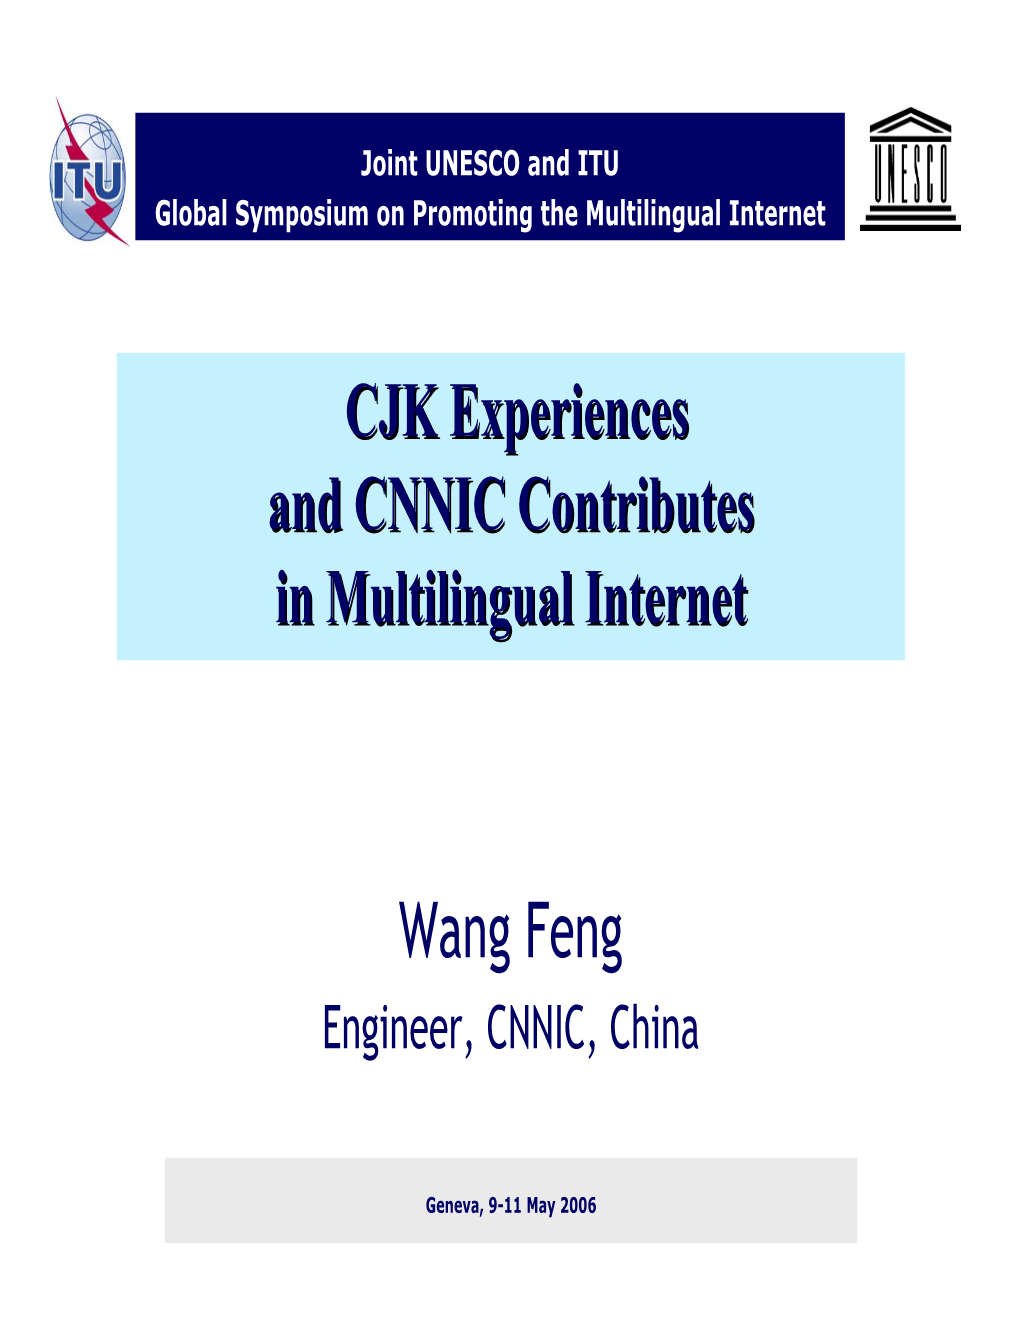 CJK Experiences and CNNIC Contributes in Multilingual Internet